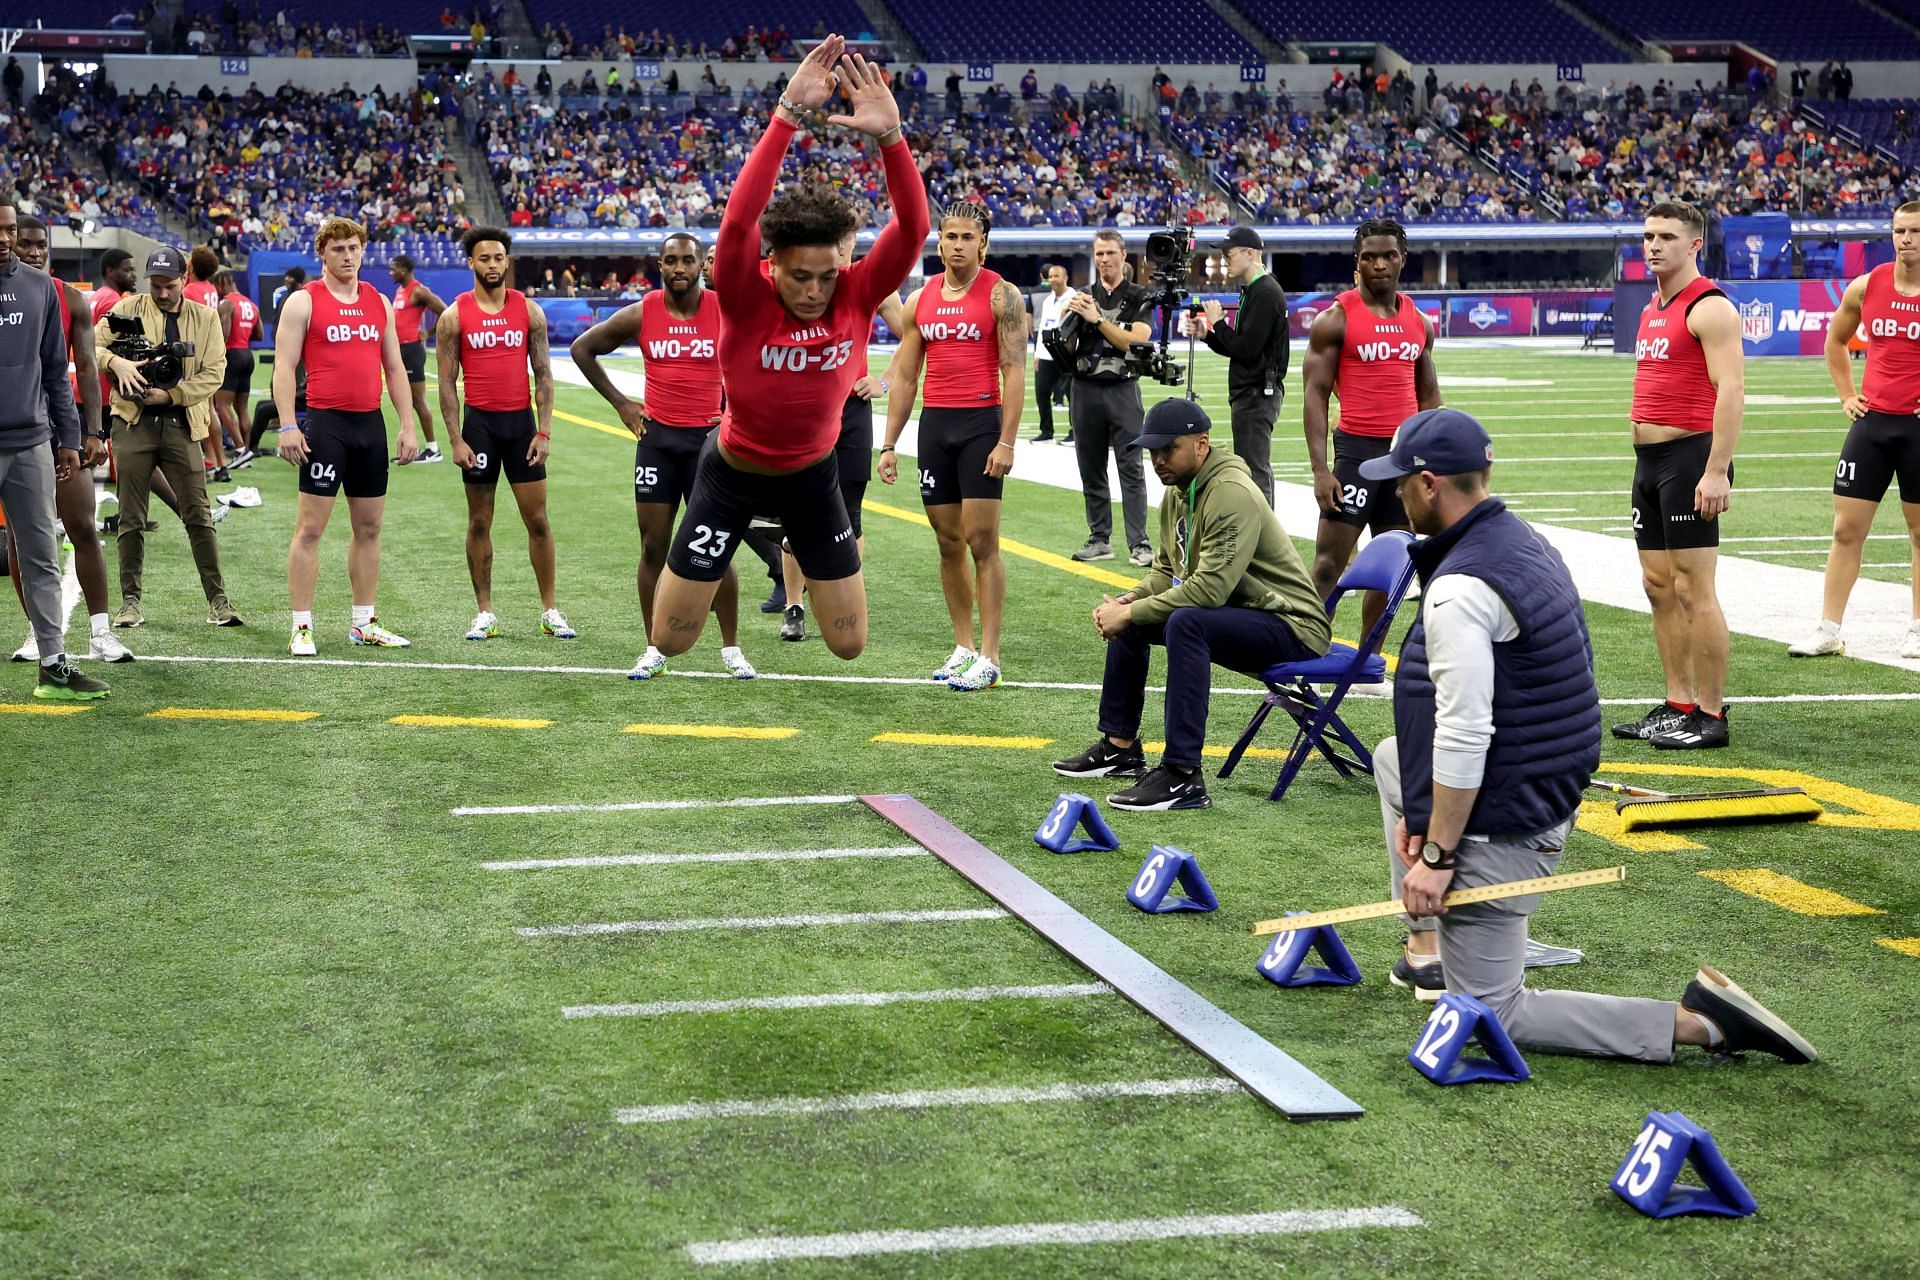 Hyatt doing the broad jump at the 2023 NFL combine